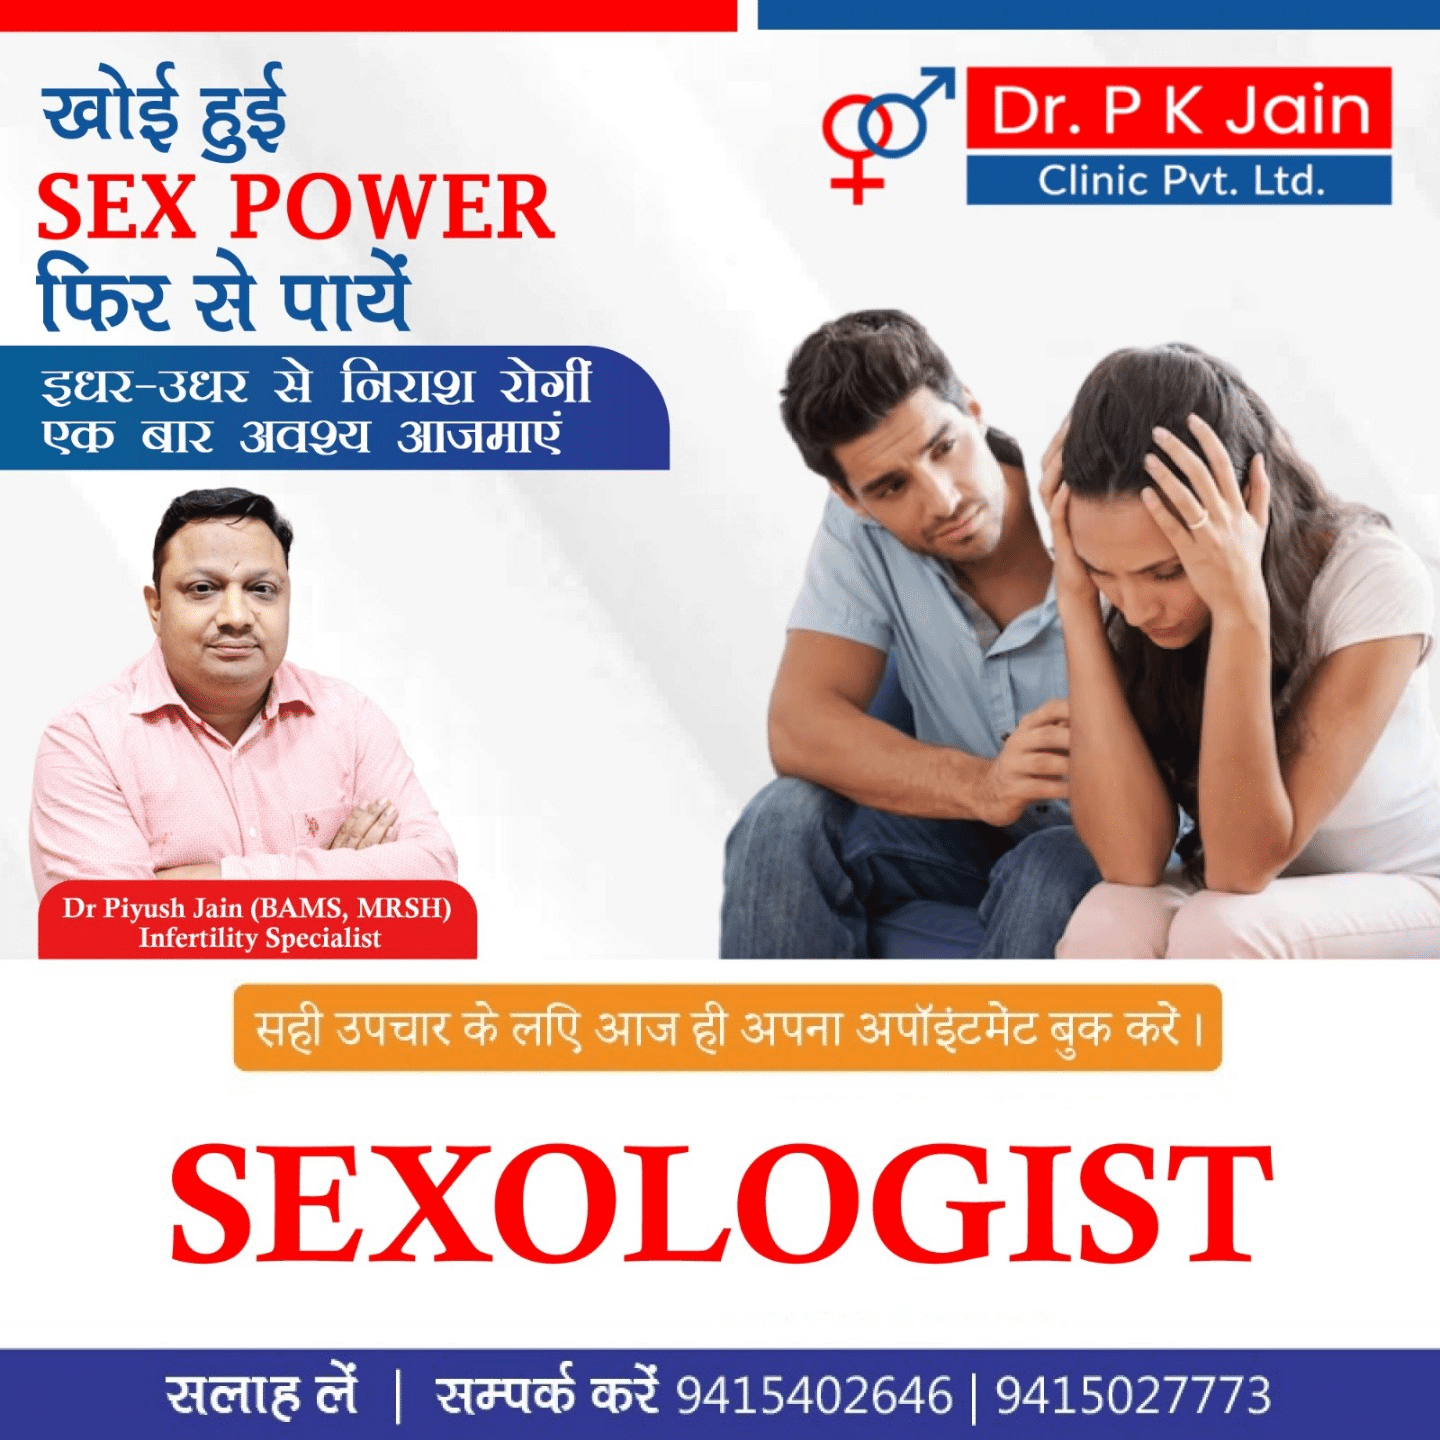 Sexologist in Lucknow - Best Sex Specialist - Top Doctors List - Book  Instant Appointment